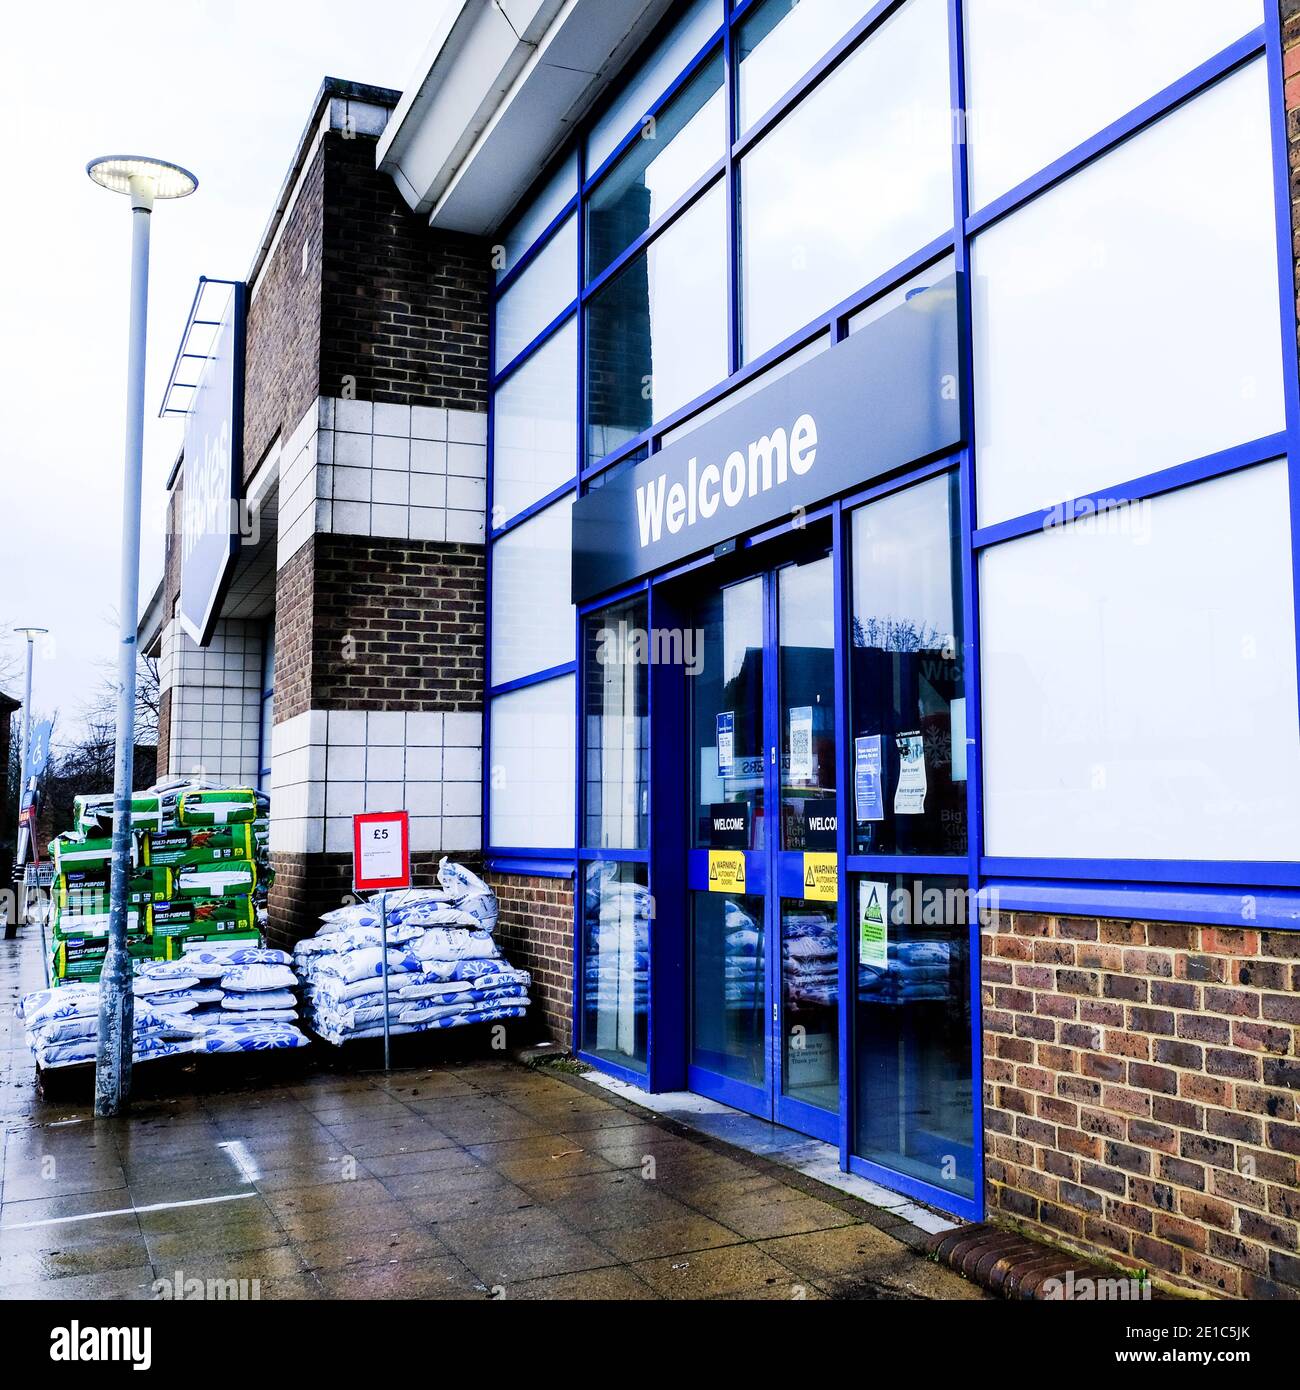 Epsom Surrey, London UK Januar 06 2021, Wickes Home Improvement Retail Chain for bathrooms and Kitchen Stockfoto